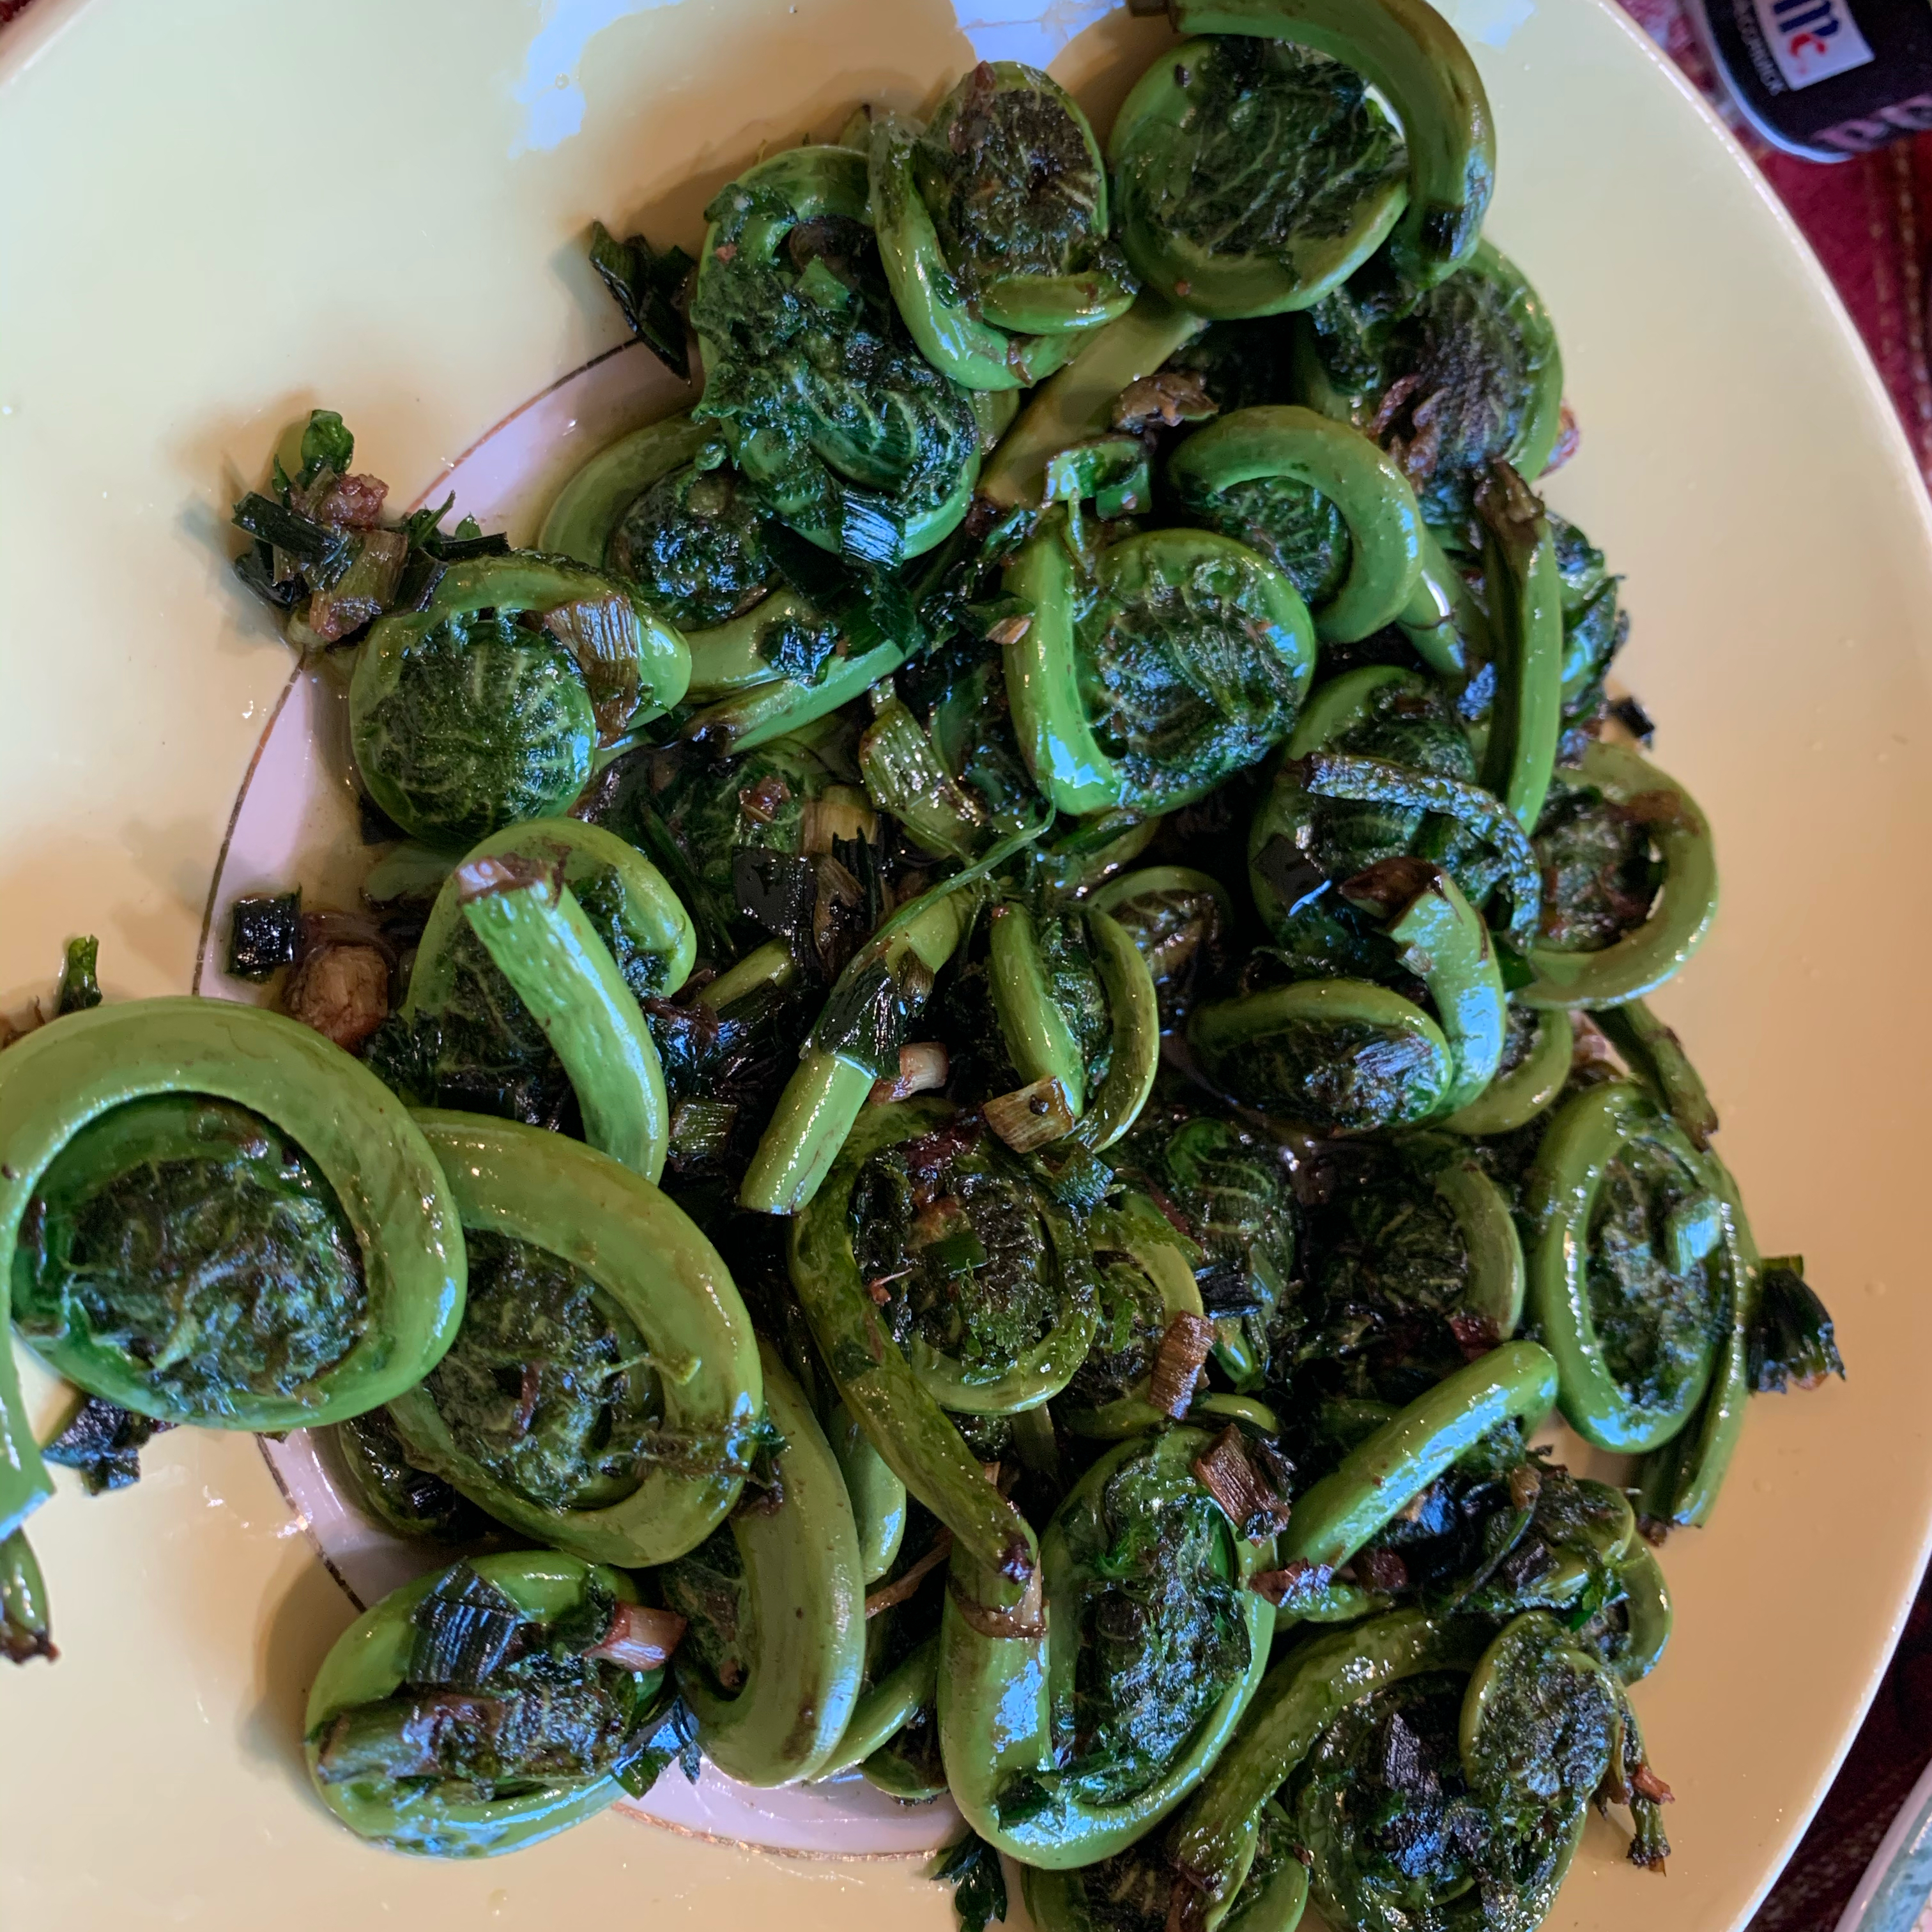 <p>The simplest way to prepare fiddleheads is often the best &mdash; here they are lightly saut&eacute;ed in olive oil with minimal seasoning so that the fiddlehead flavor really shines. Enjoy as a green veggie side just as you would asparagus, broccoli, or green beans.</p>
                          